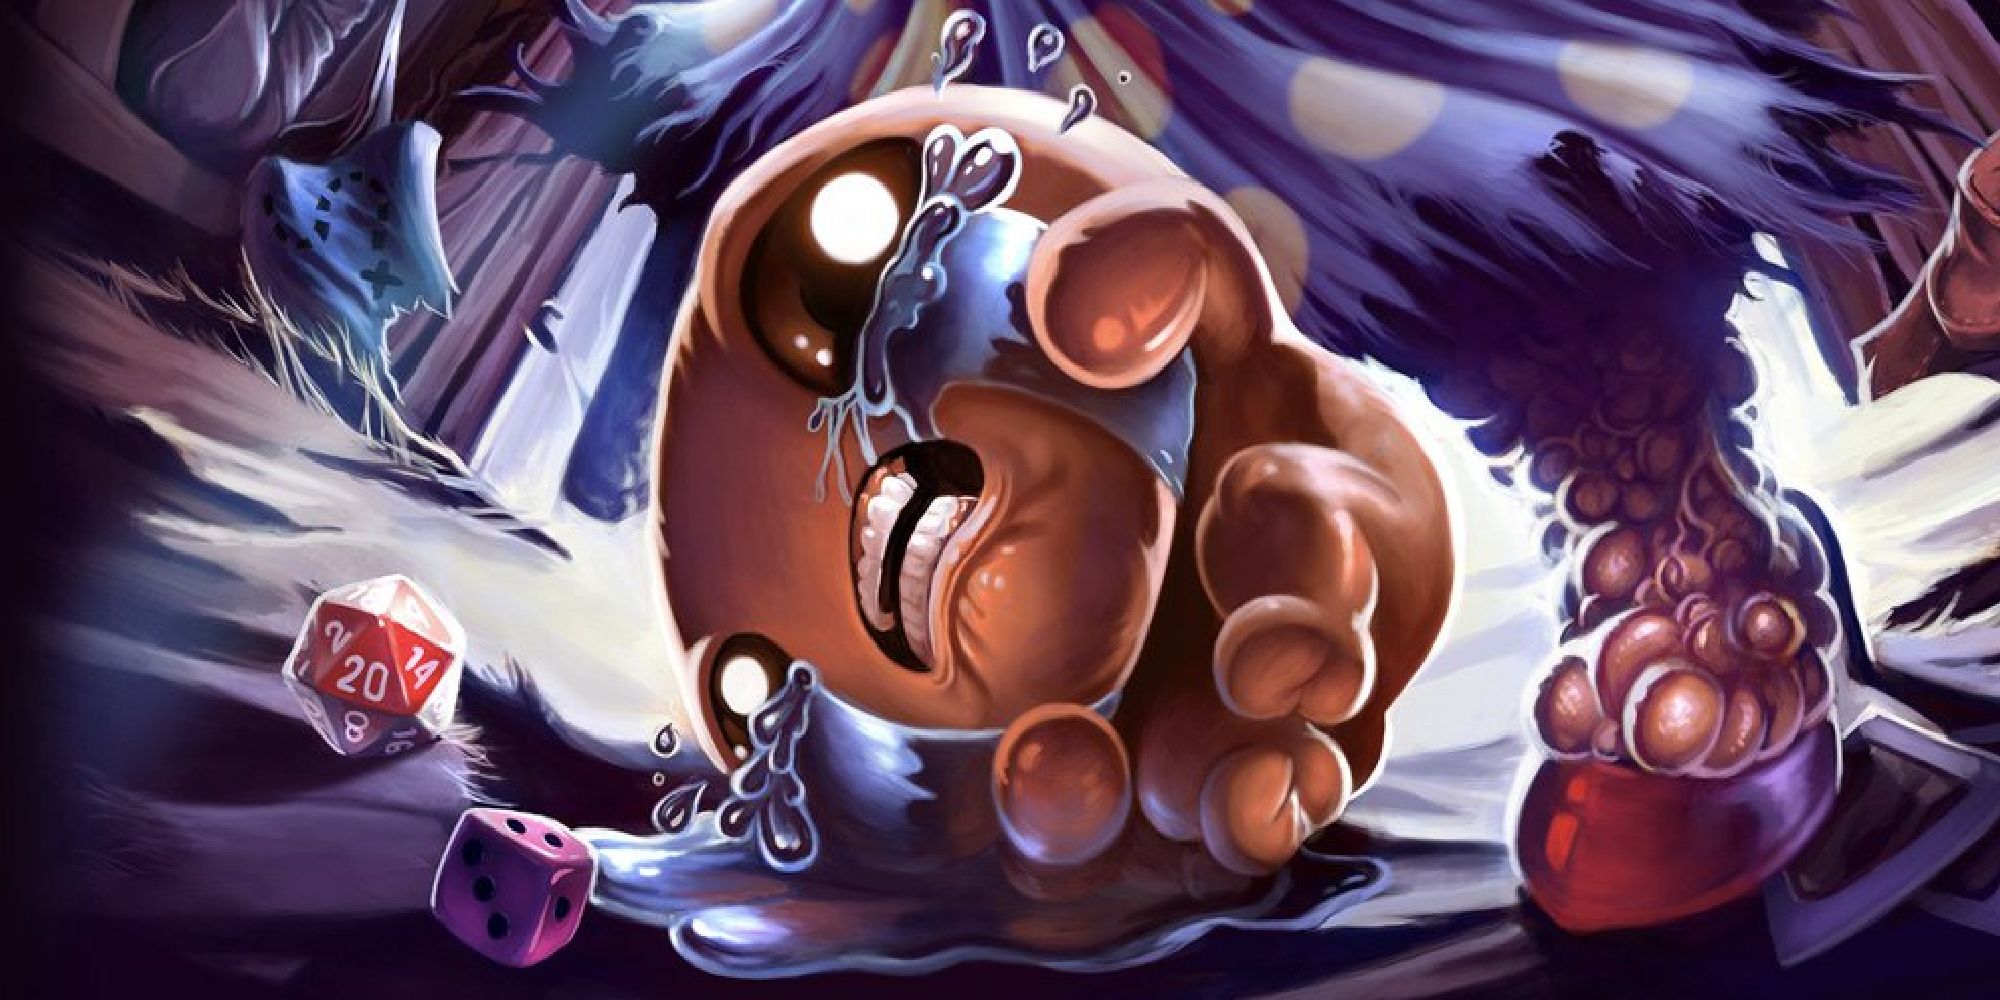 Binding of Isaac, Isaac crying underneath his mother with dice on the floor